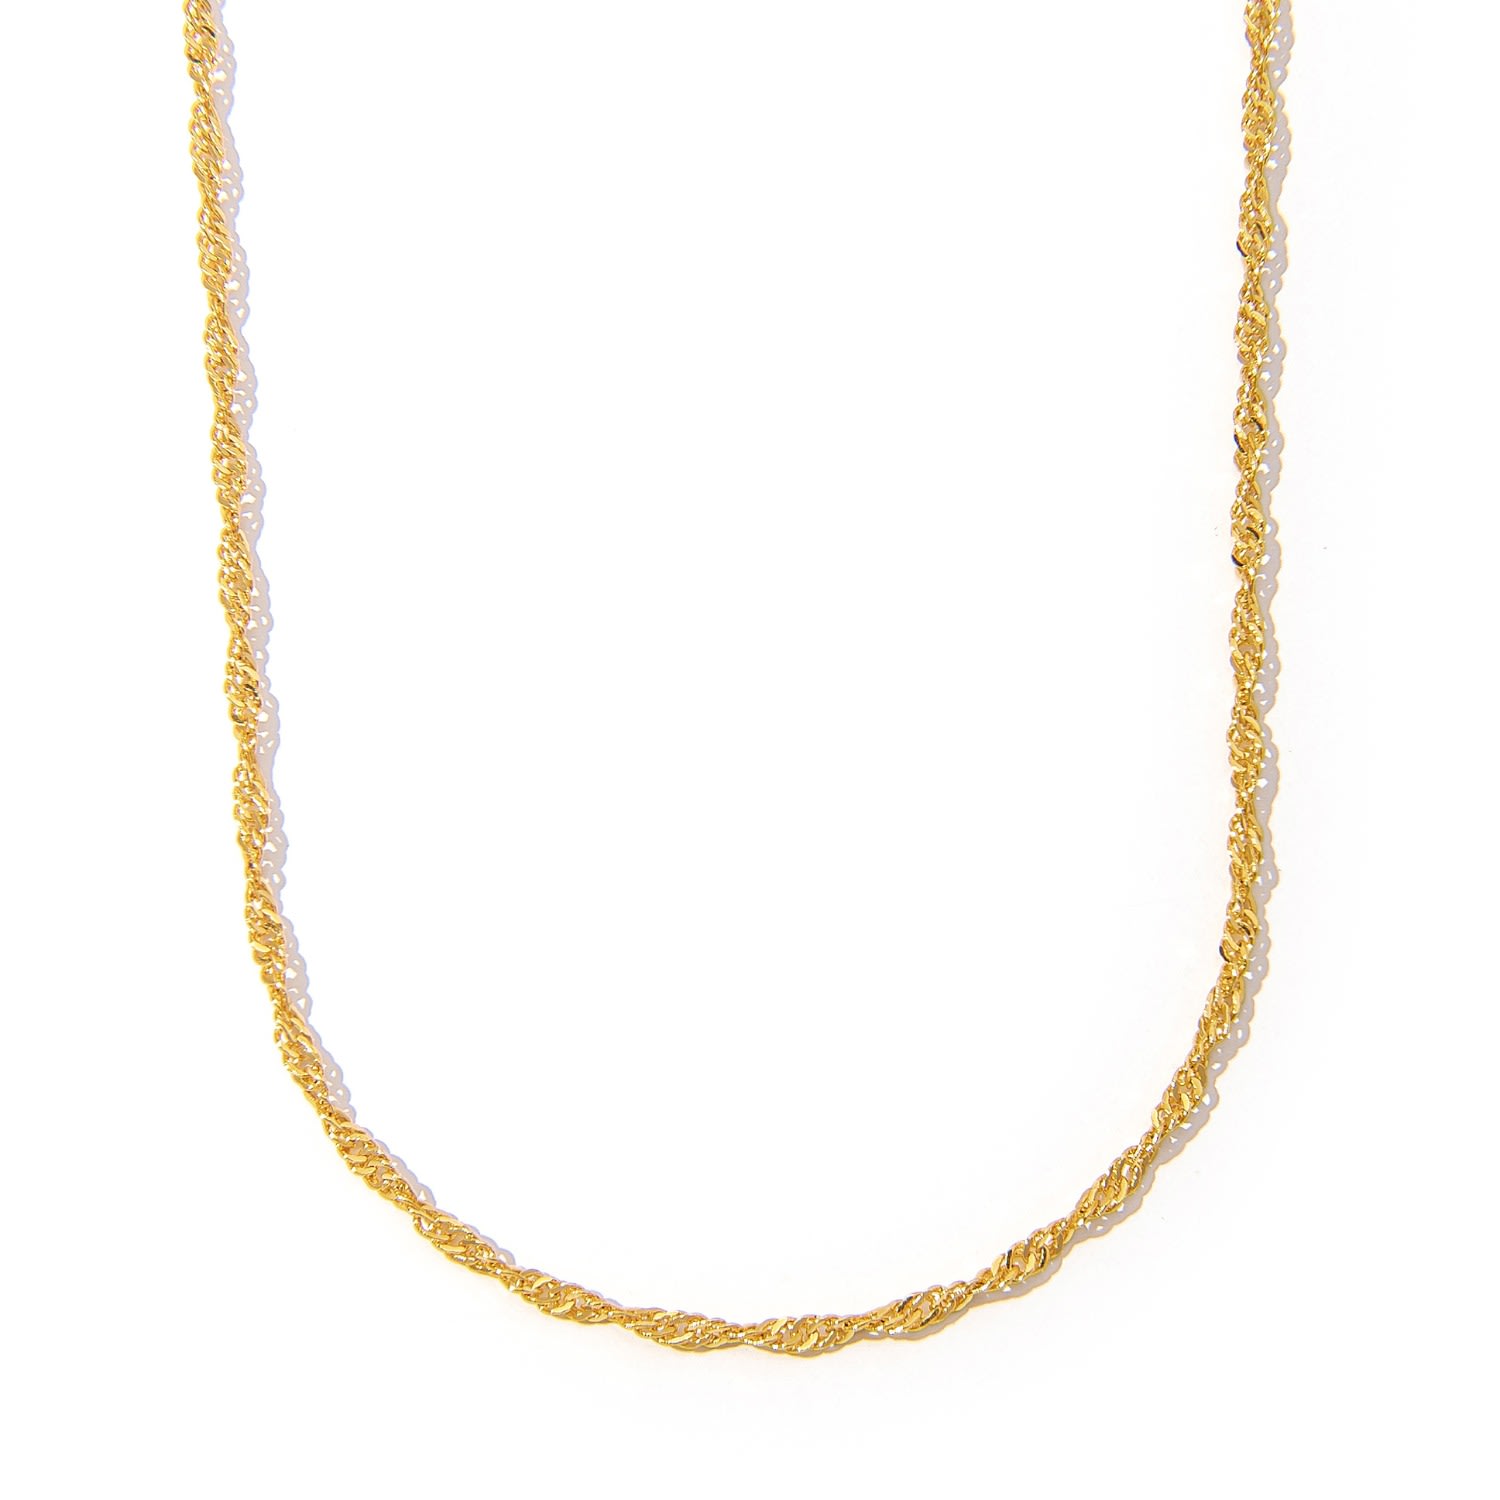 Women’s Singapore Twist Gold Filled Chain The Essential Jewels